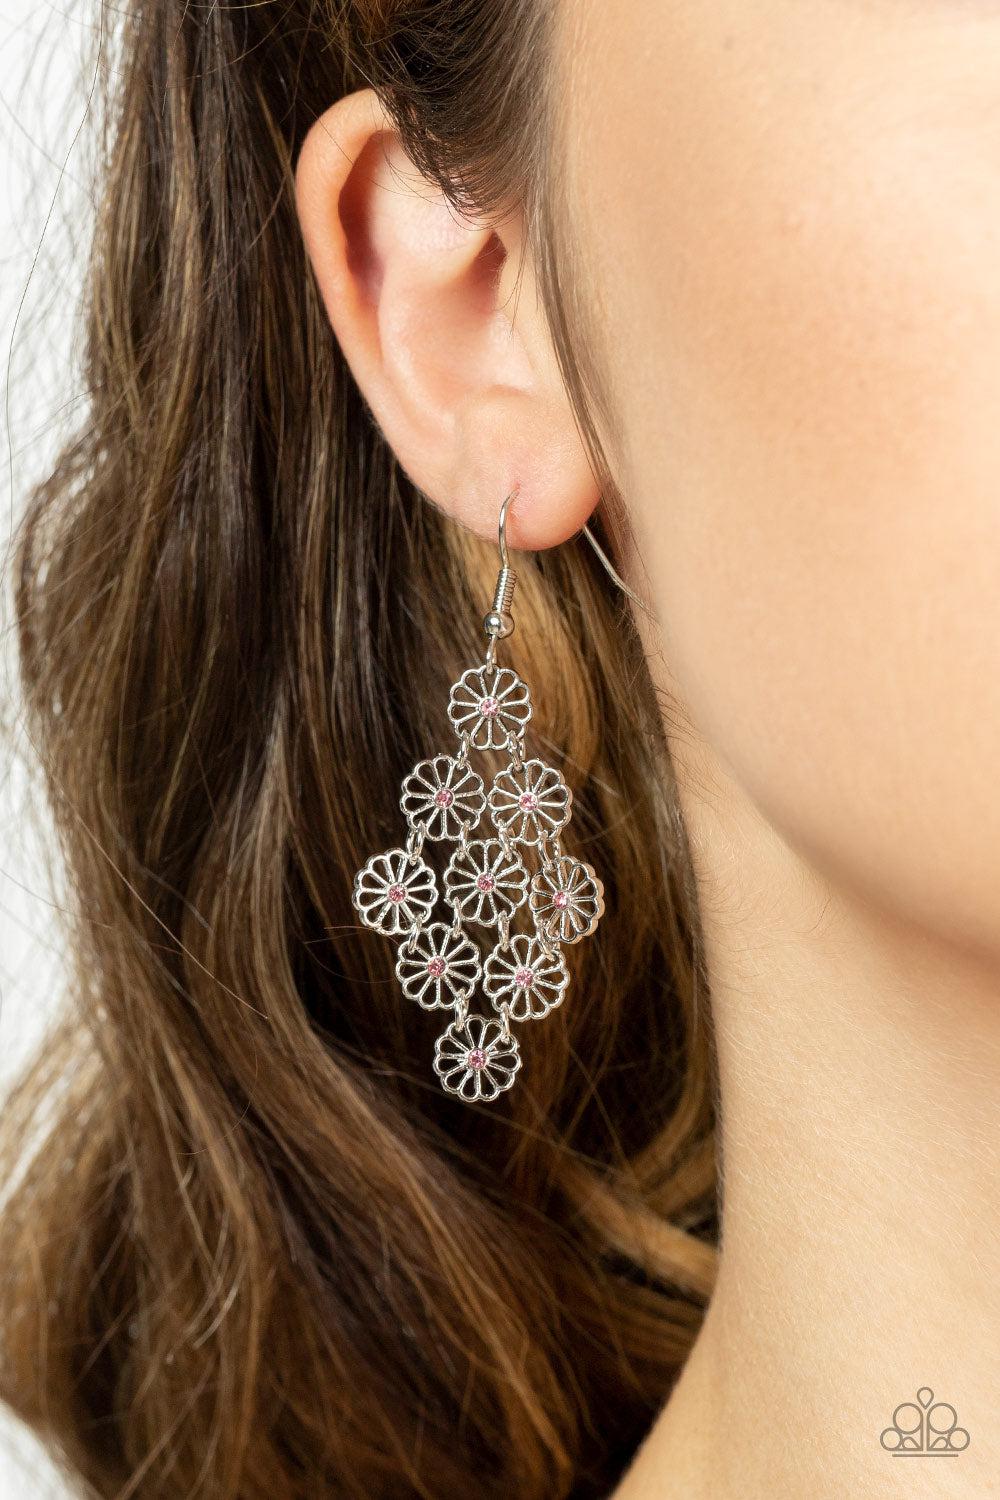 Bustling Blooms Pink Flower Earrings - Paparazzi Accessories- lightbox - CarasShop.com - $5 Jewelry by Cara Jewels